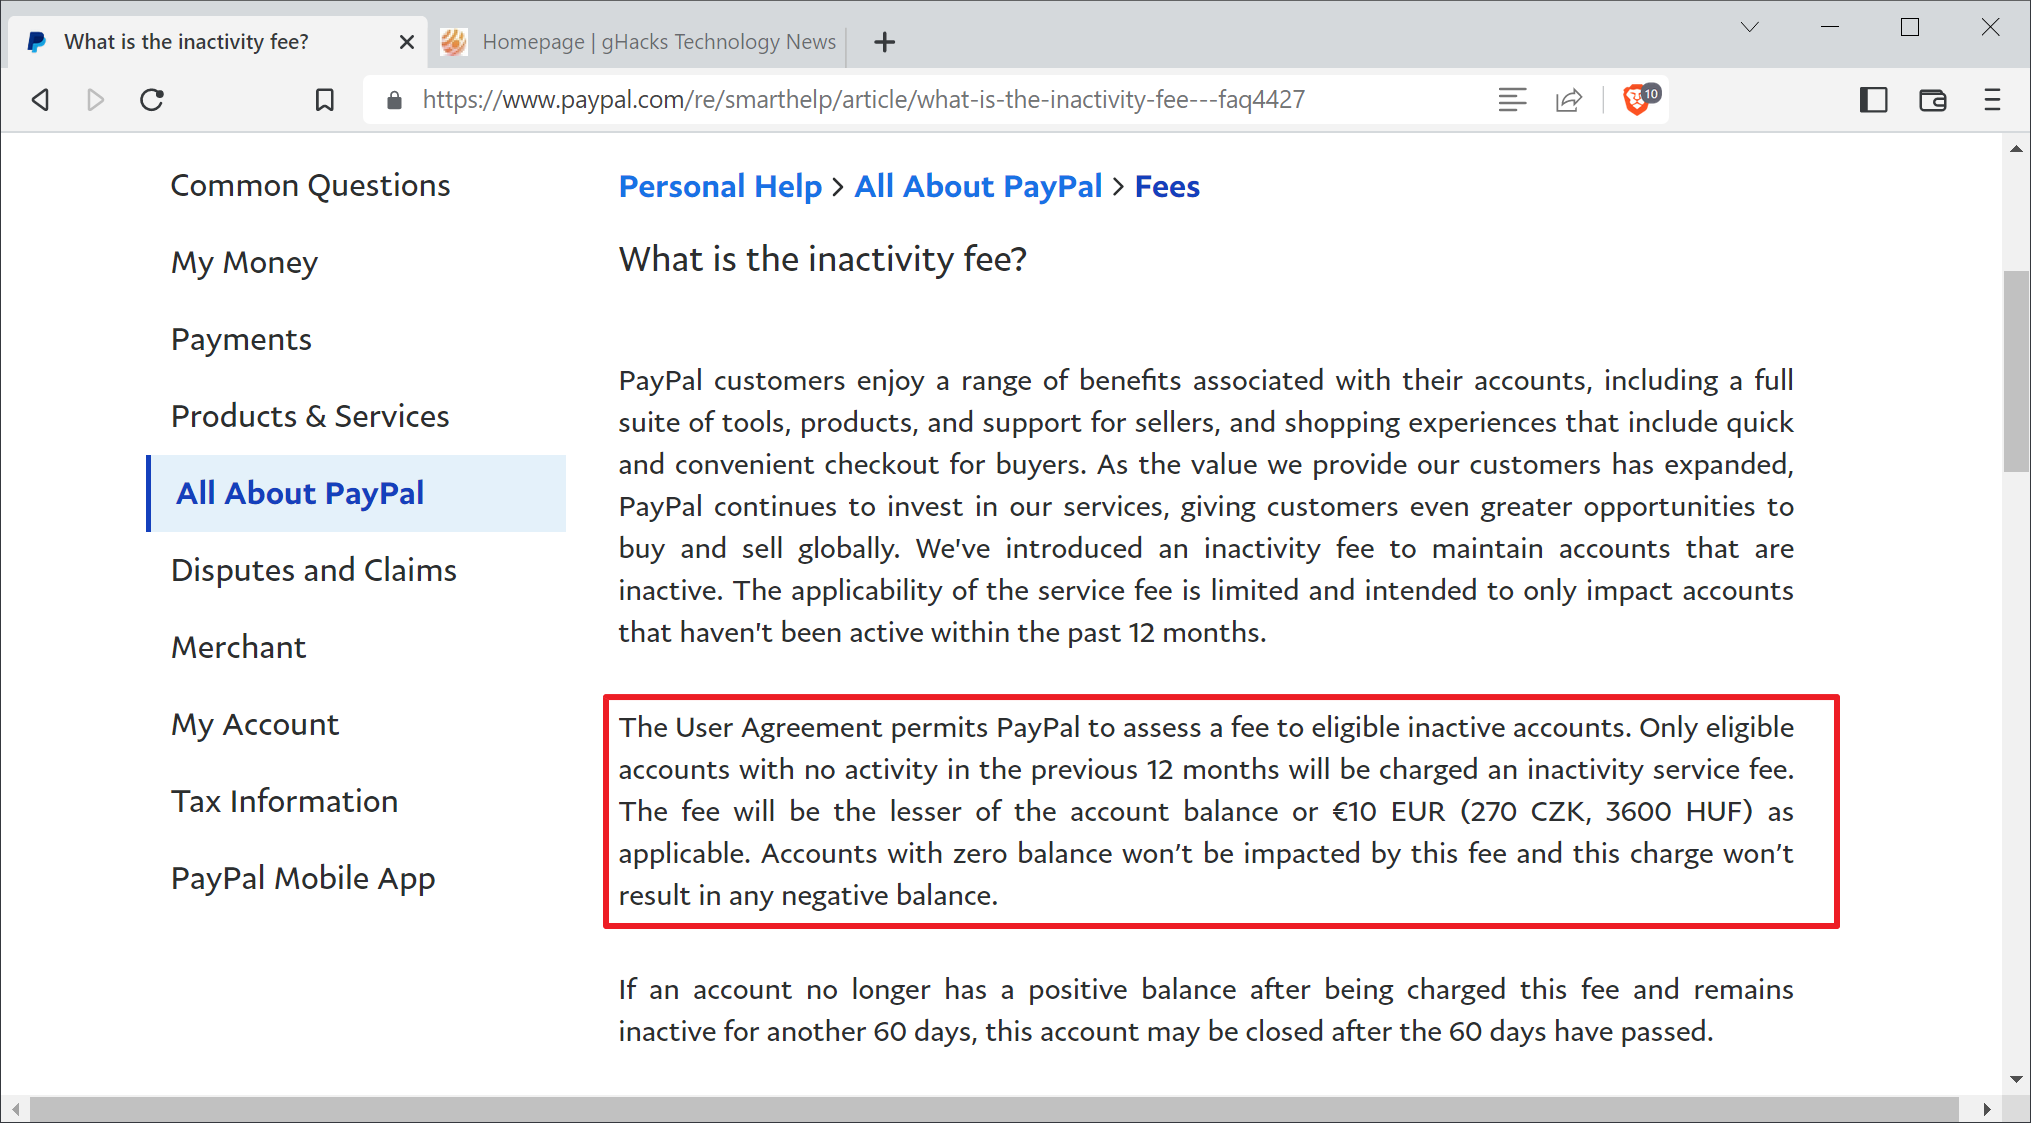 Here is what you need to know about PayPal's Inactivity Fee